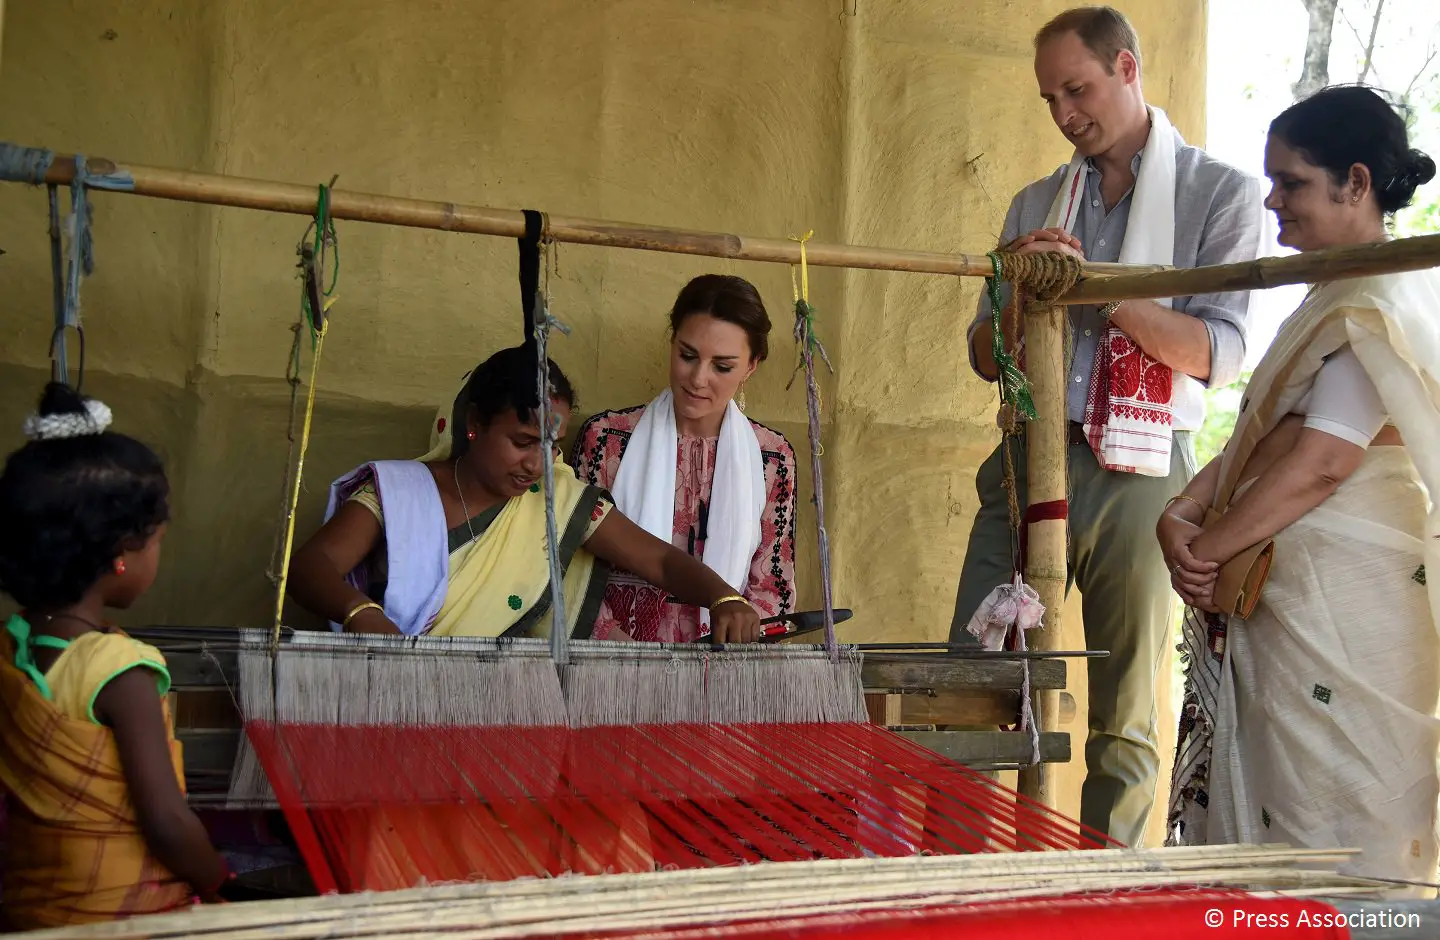 The Duke and Duchess sat on a mat covered floor with people and heard about their lifestyle